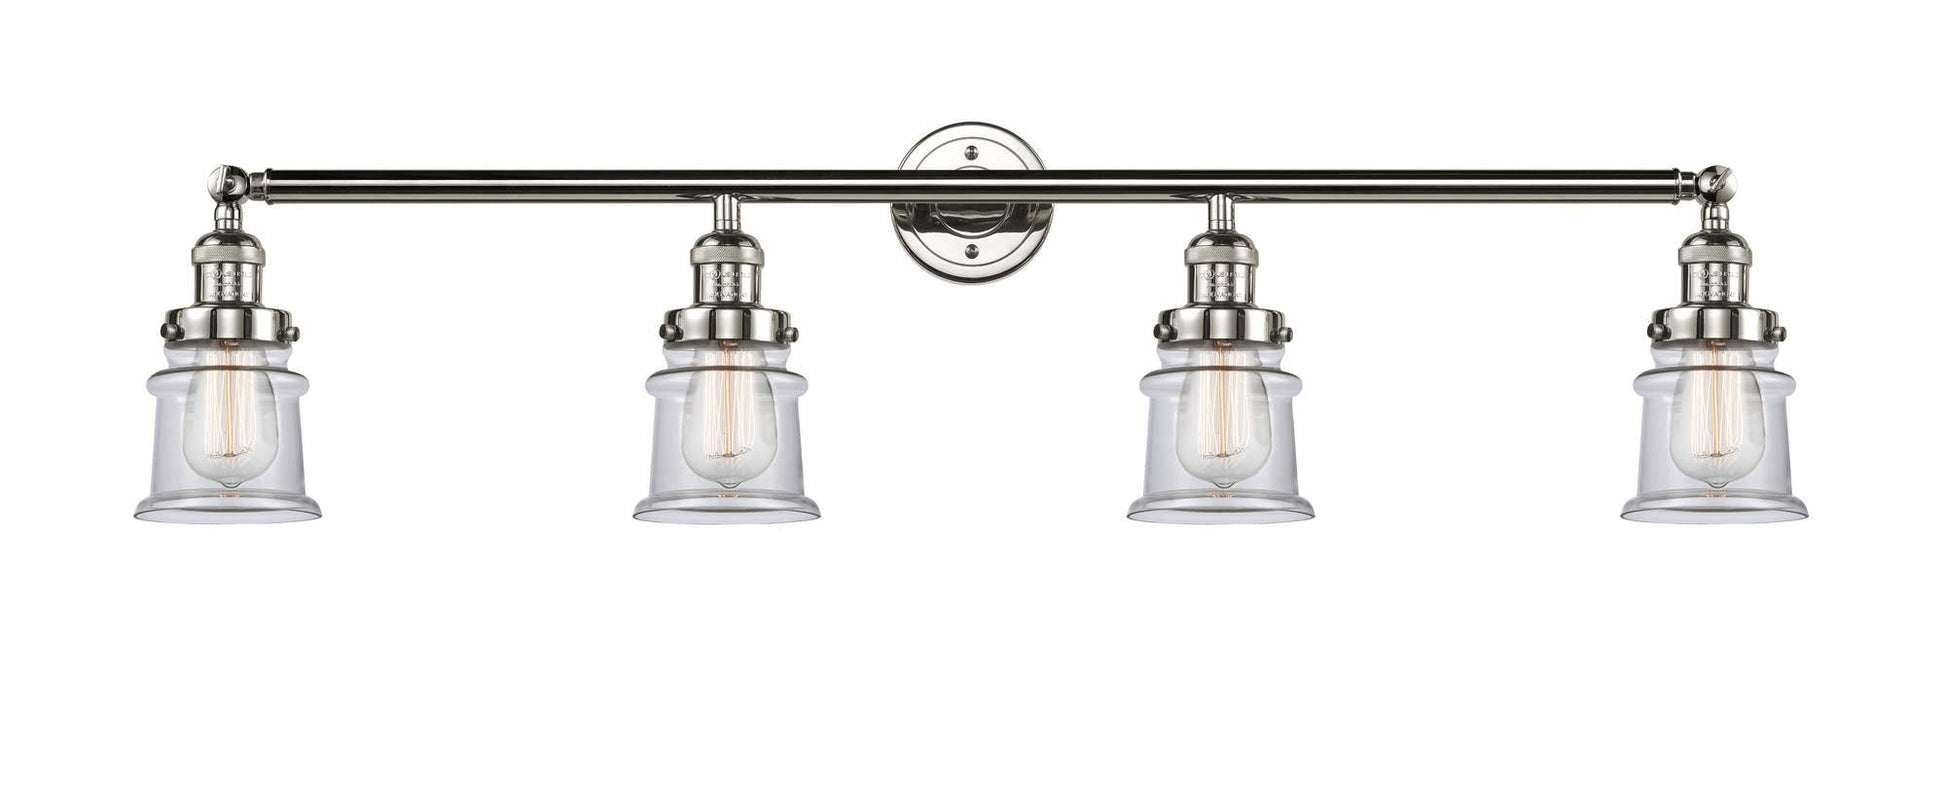 215-PN-G182S 4-Light 42" Polished Nickel Bath Vanity Light - Clear Small Canton Glass - LED Bulb - Dimmensions: 42 x 7.5 x 11.25 - Glass Up or Down: Yes